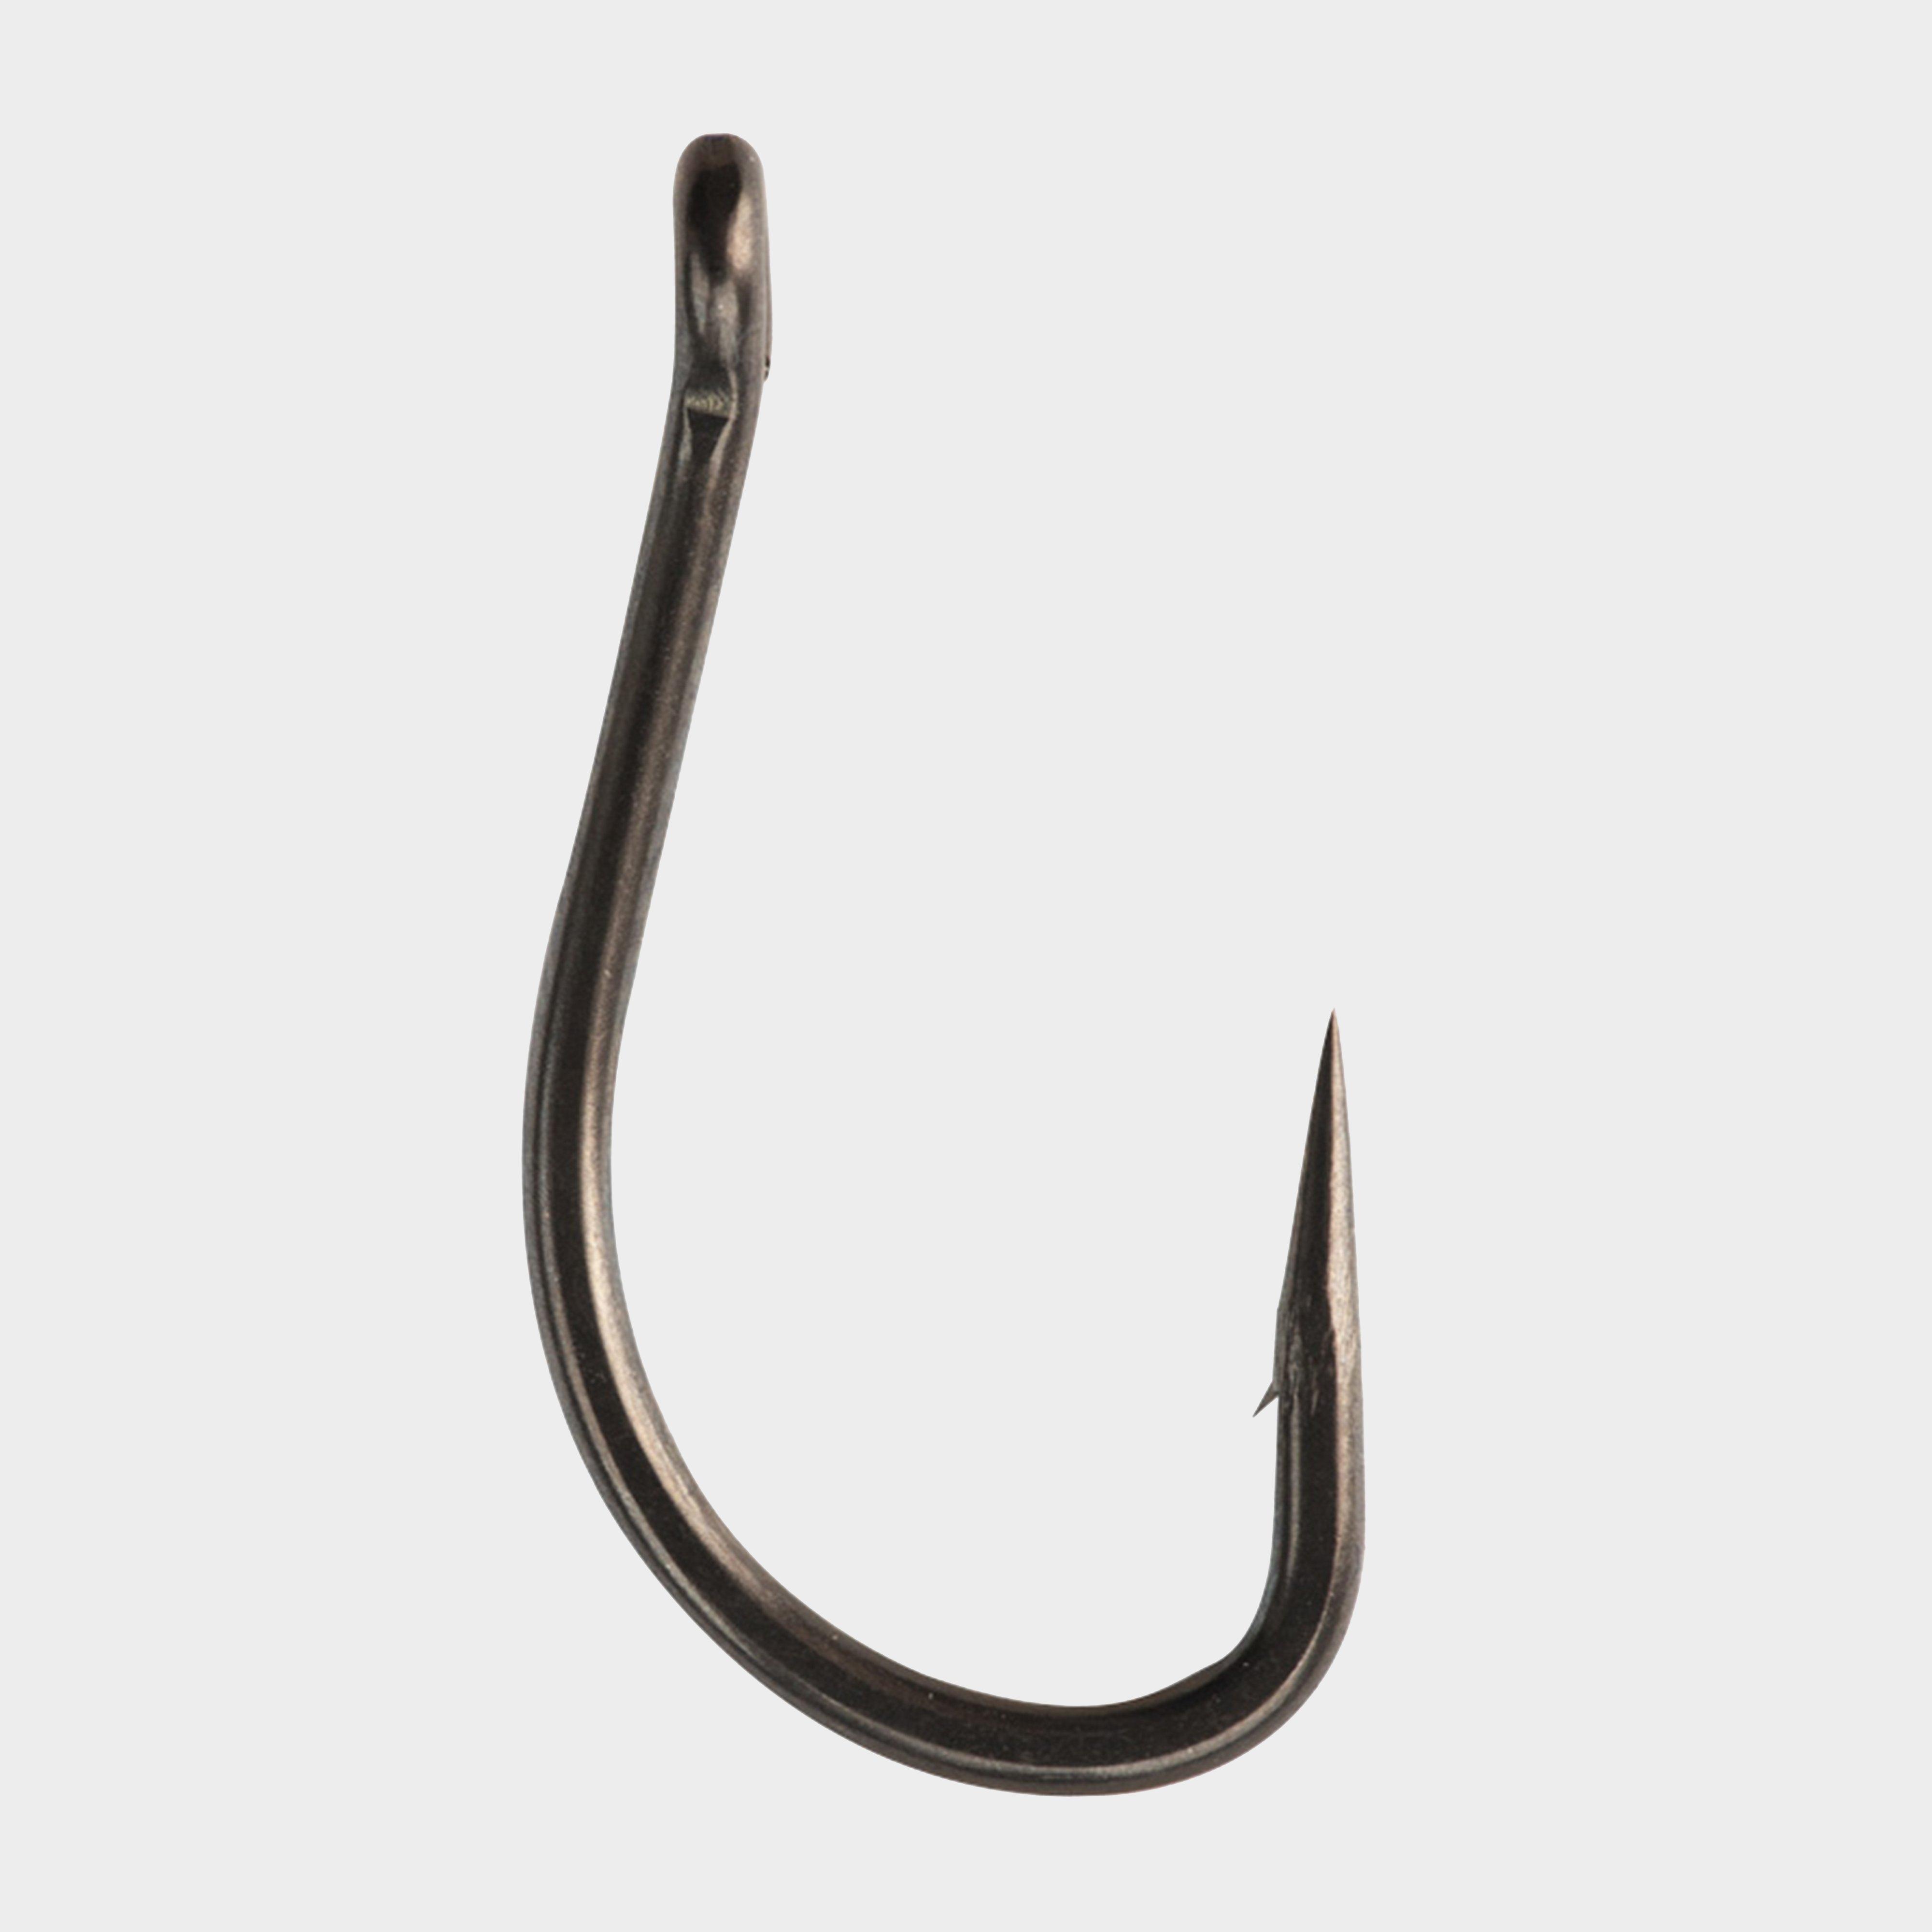 Photos - Fishing Hook / Jig Head Angler THINKING  Out-Turned Eye Hook Size 4  (Barbed)